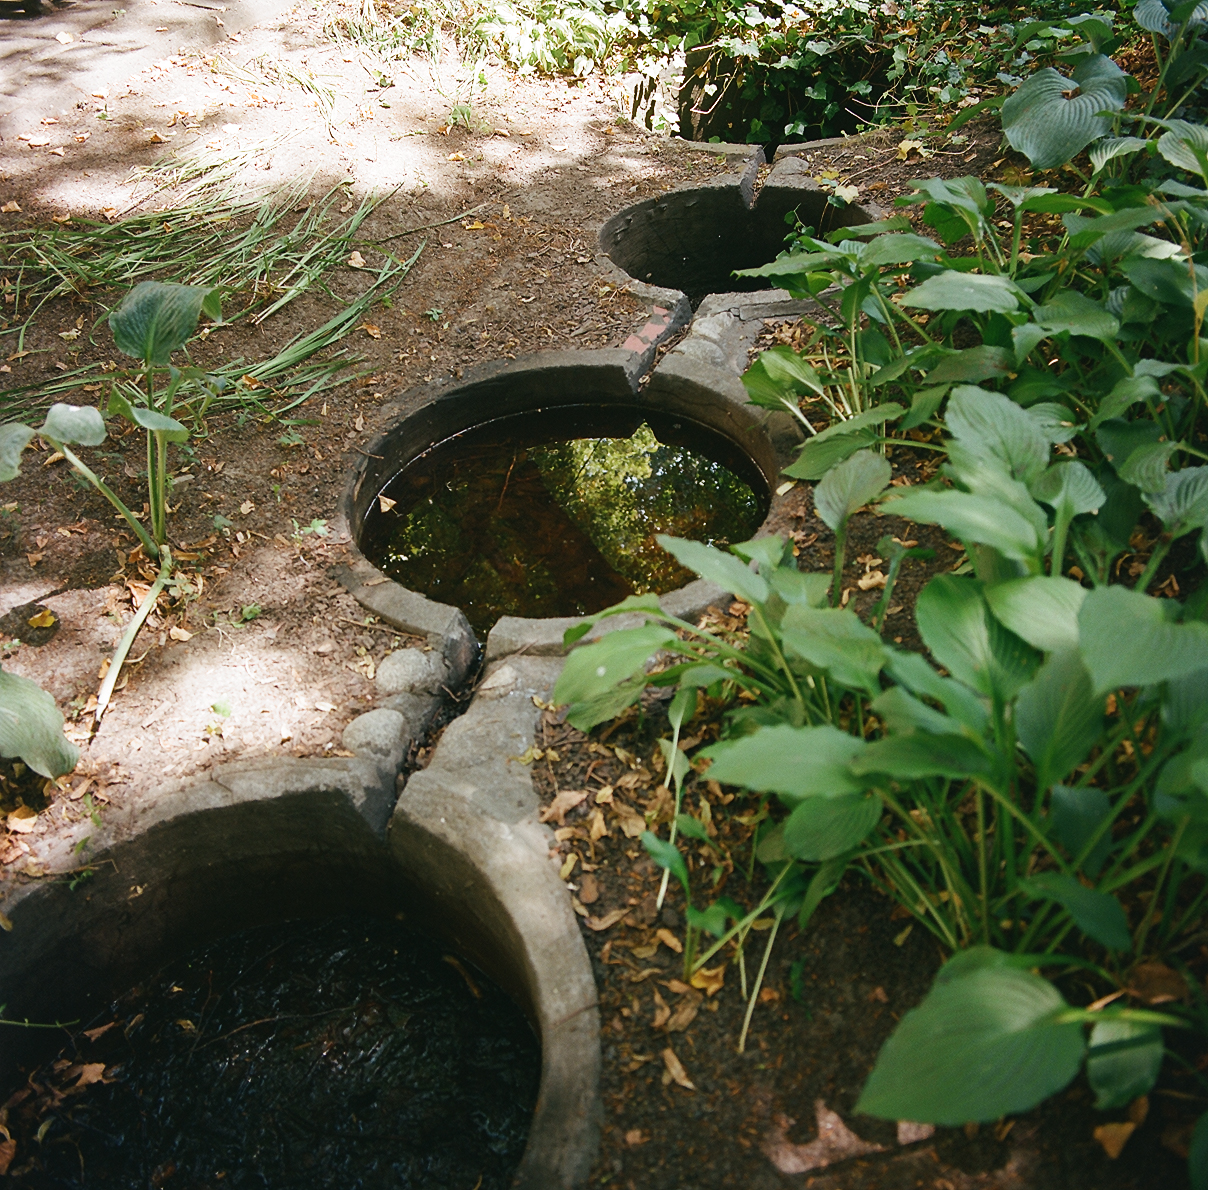 Hydrobotanical teaching apparatus from 1963 in the courtyard of the Faculty of Architecture, Warsaw University of Technology, 55 Koszykowa Street, Warsaw. The pond requires minor repairs and replanting.